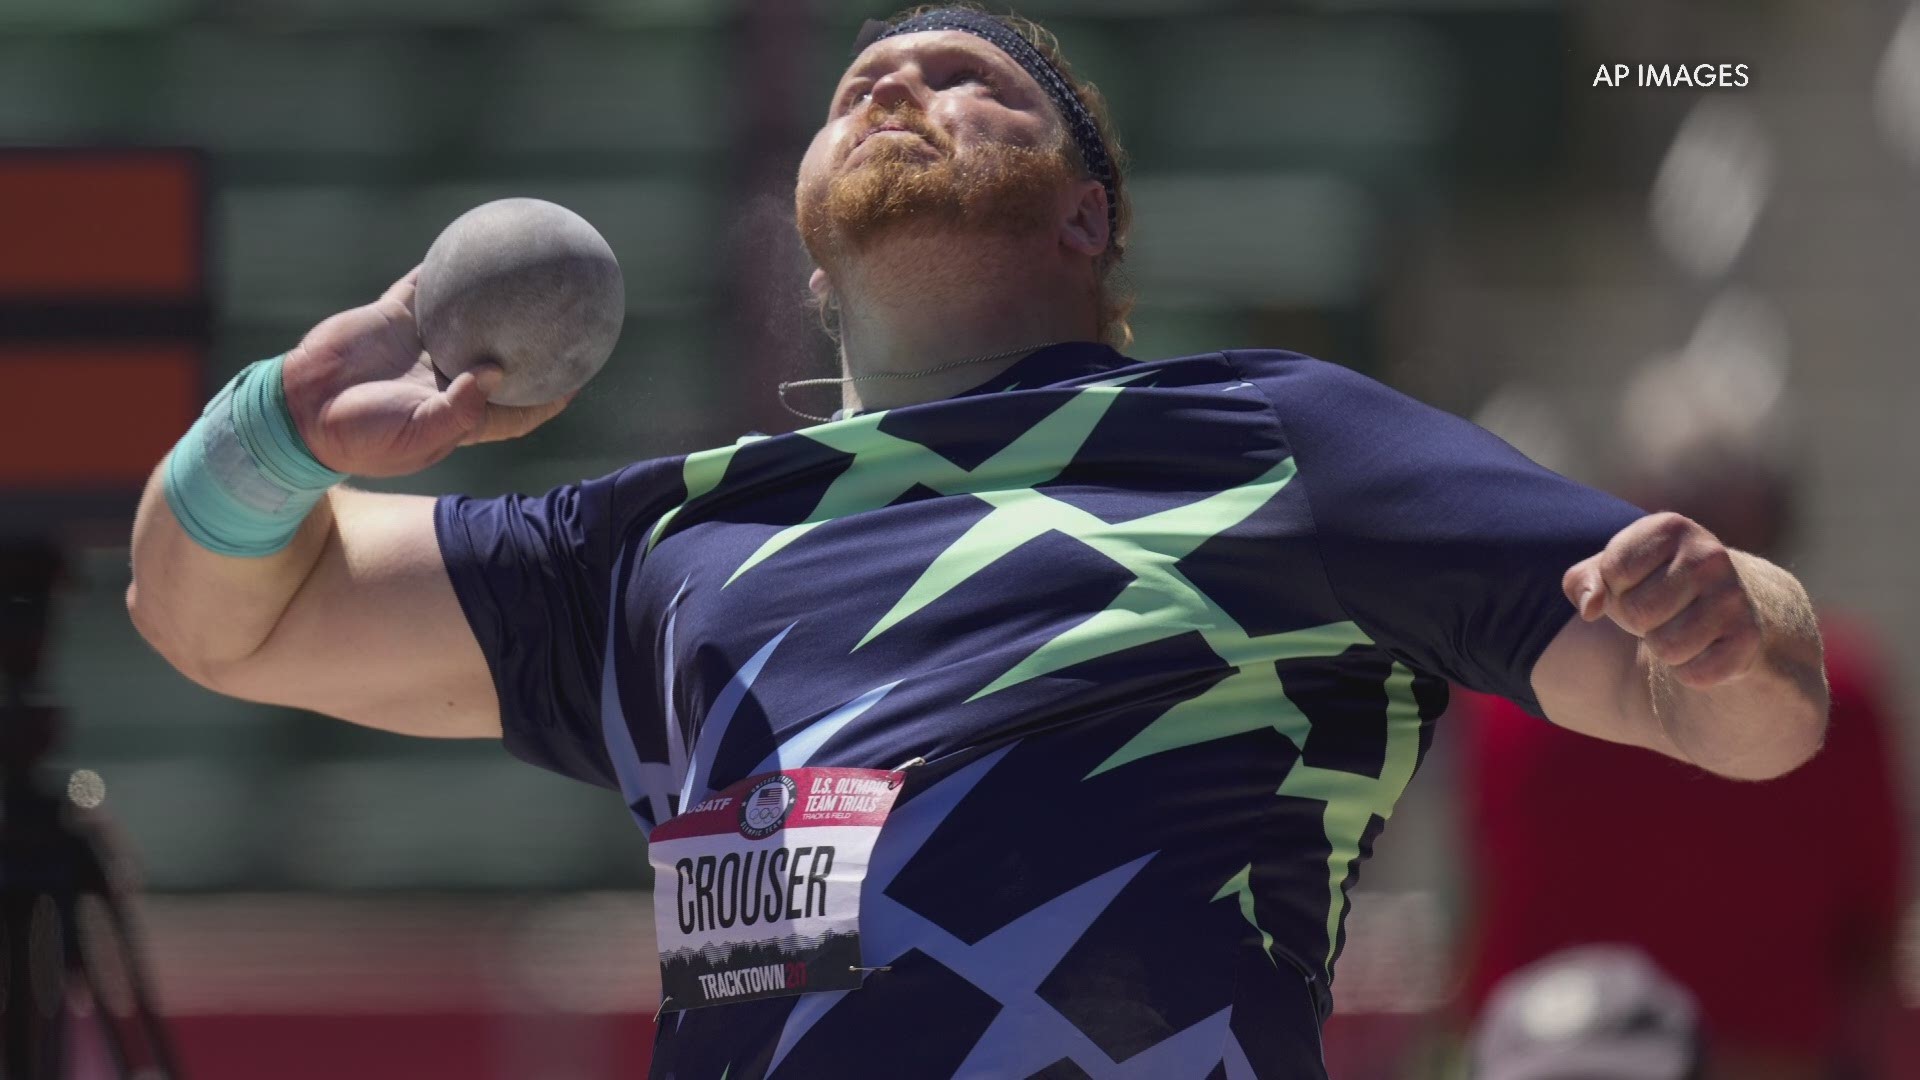 Oregon native Ryan Crouser has shattered a world record on his way to clinching a spot on Team USA in the Tokyo Olympics.